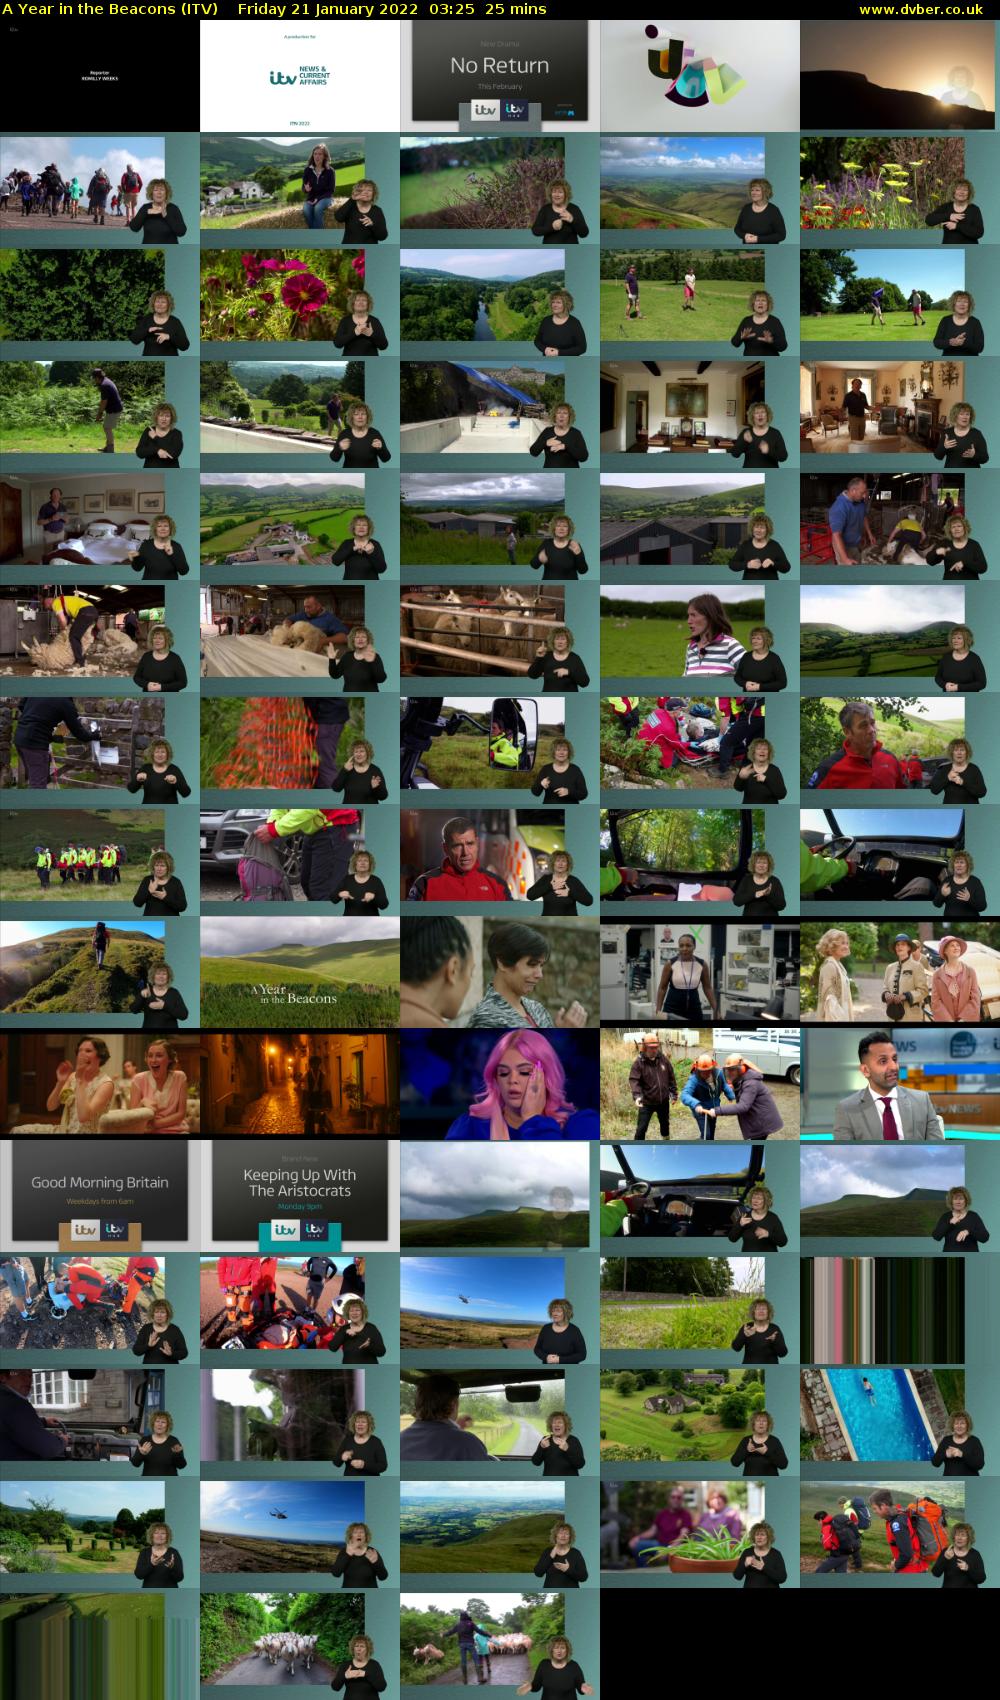 A Year in the Beacons (ITV) Friday 21 January 2022 03:25 - 03:50